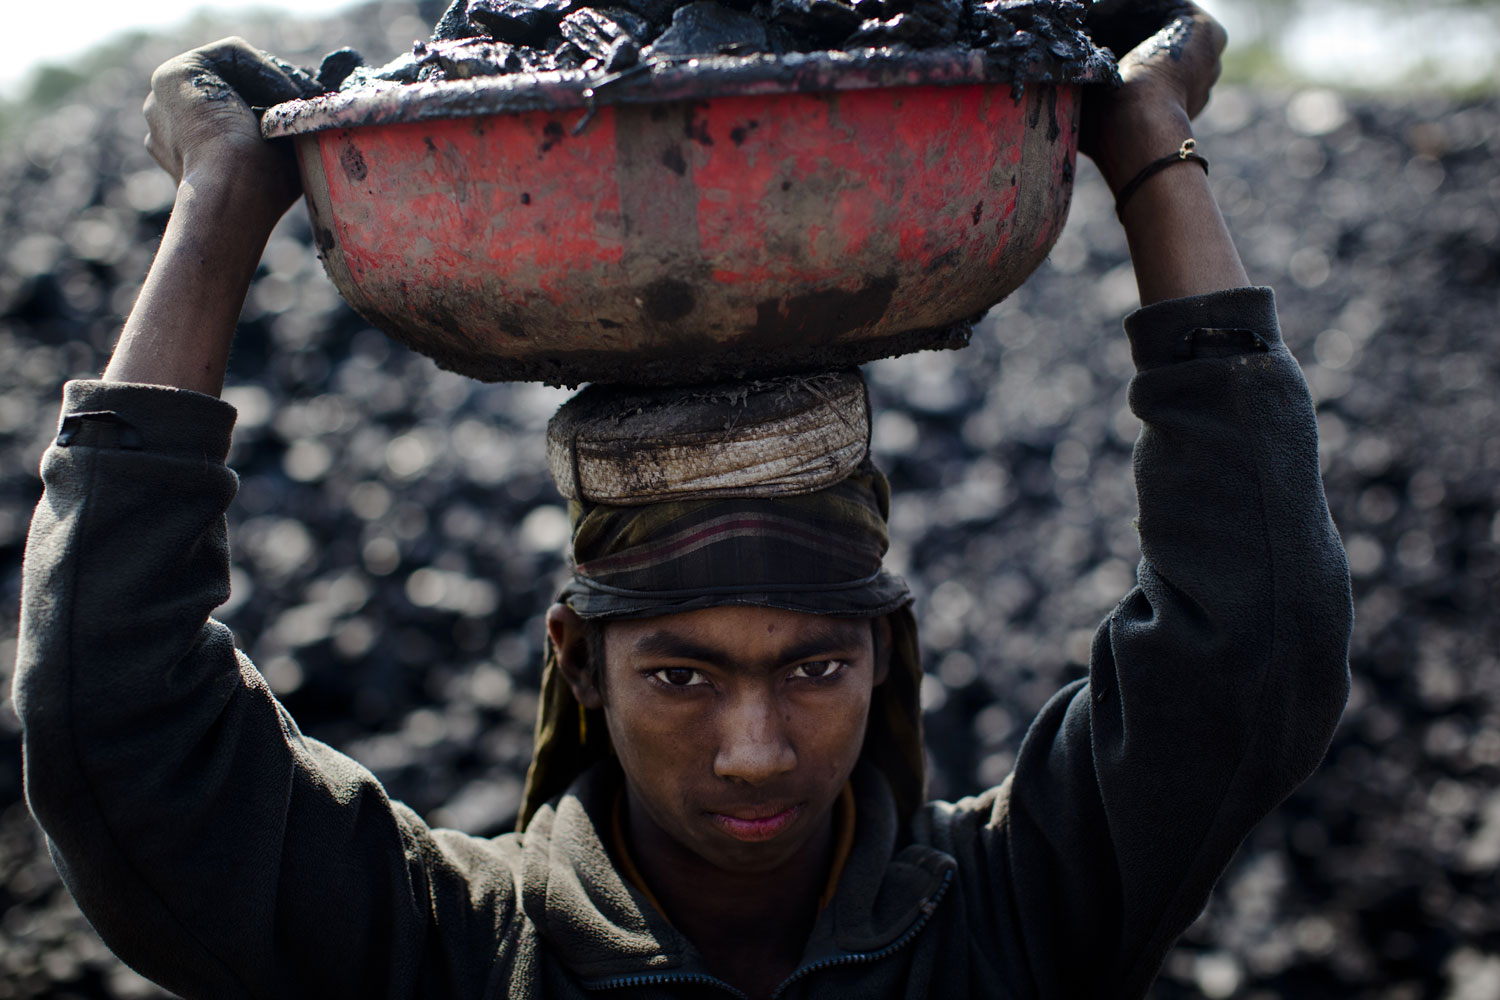 12 year old Abdul Kayum from Assam pauses for a portrait, whilst working at a coal depot carrying coal to be crushed